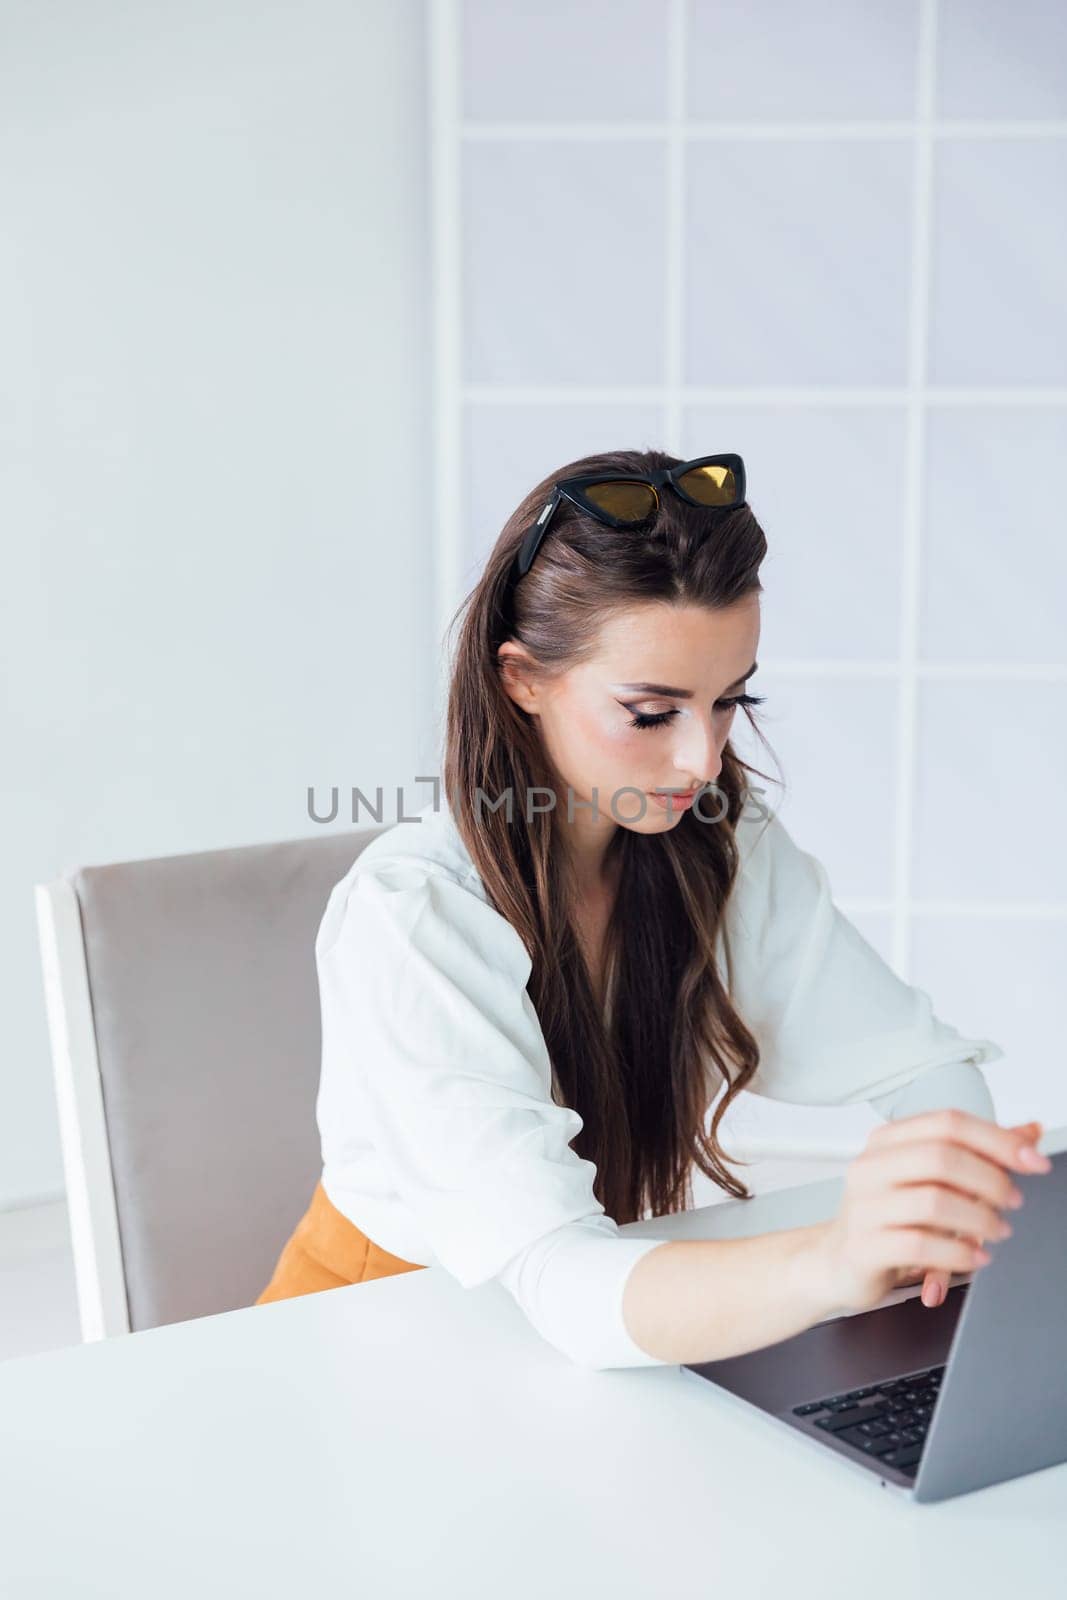 woman with laptop computer remote work internet conversation online communication communication by Simakov